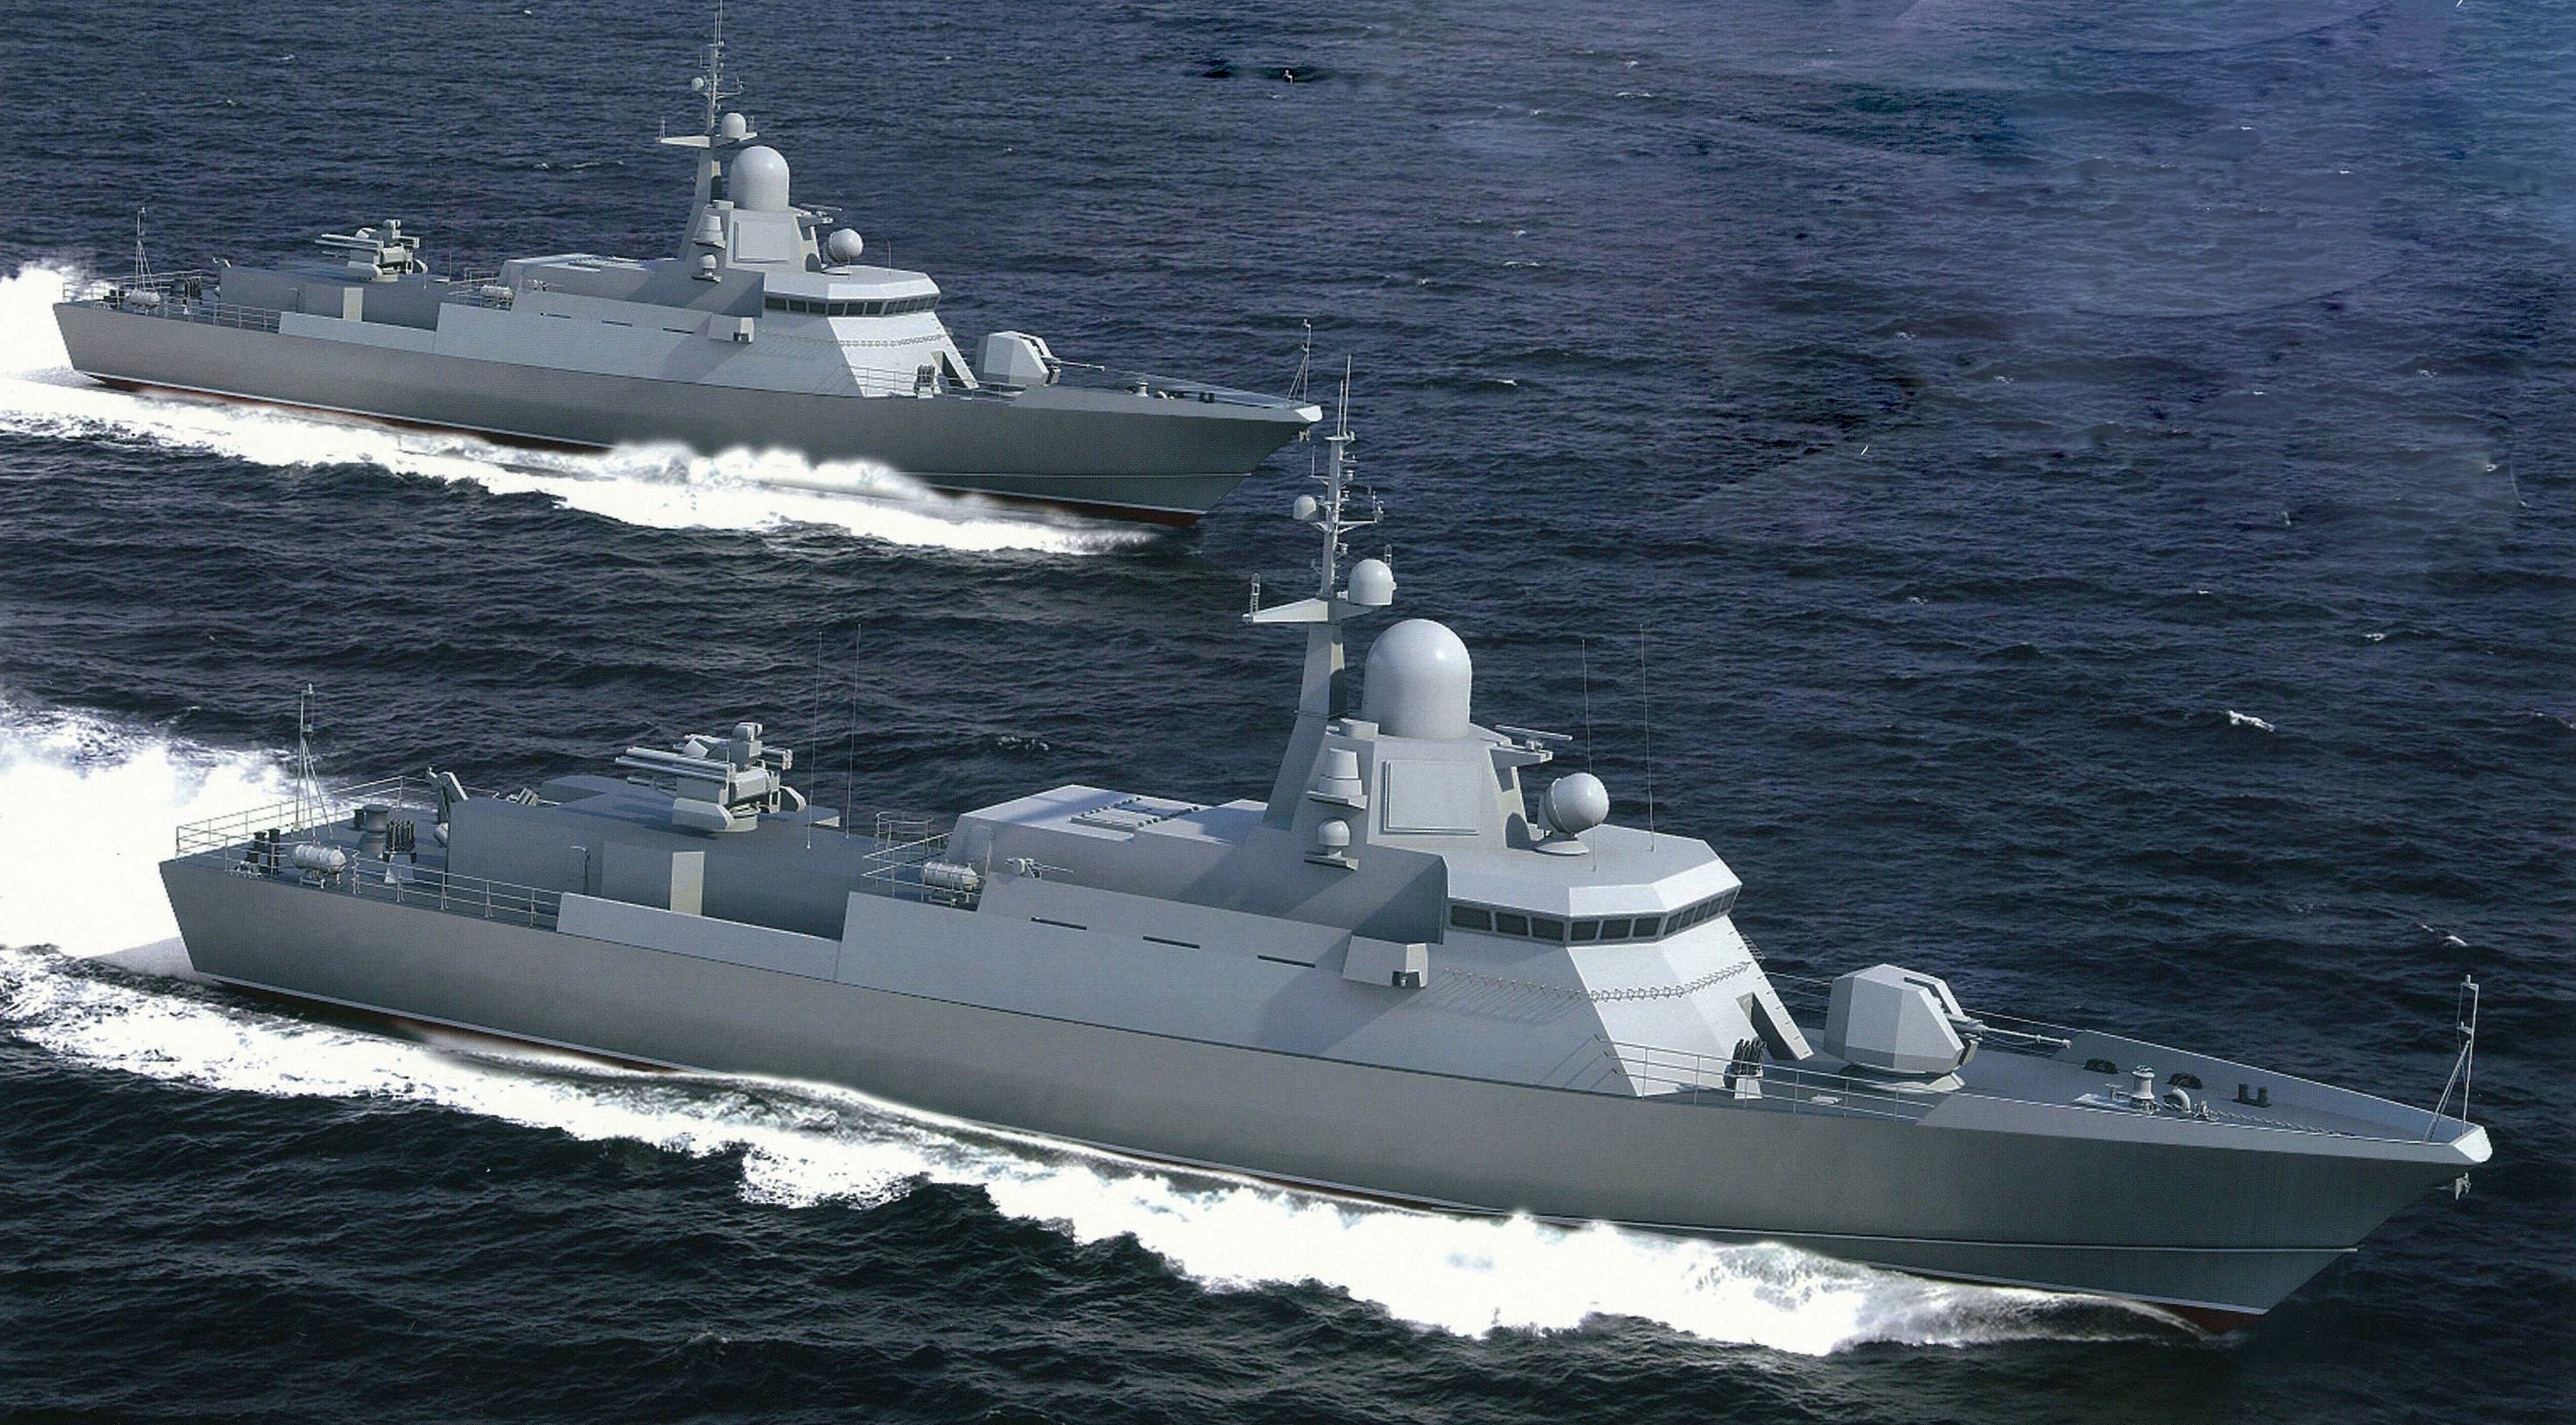 Shkval Class Destroyers; World's Most Heavily Armed Warships to Provide